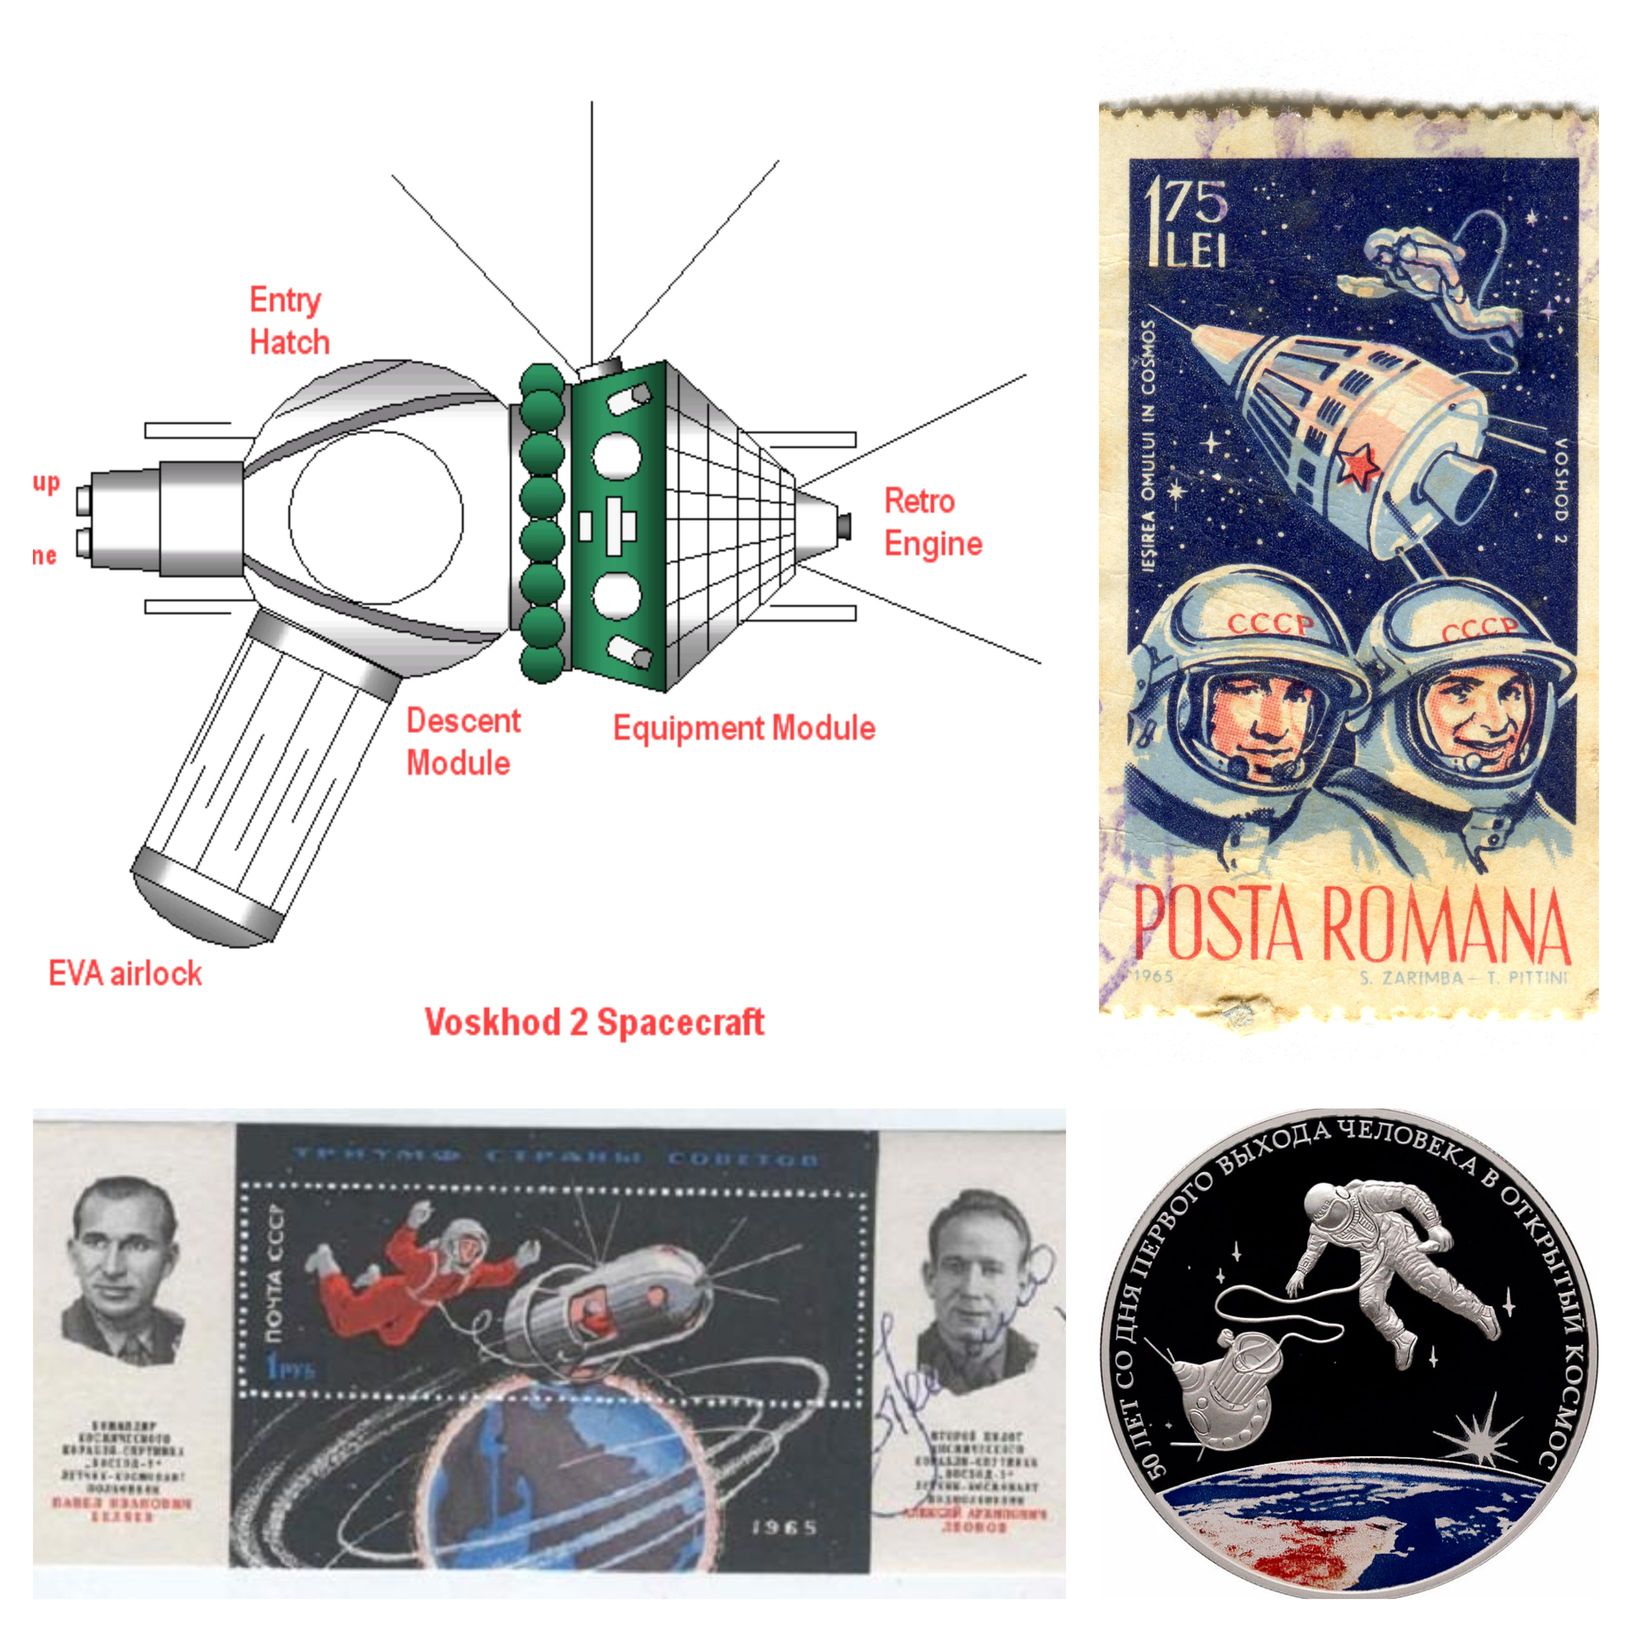 The Voskhod 2 spacecraft, along with Russian commemorative coin and Romanian stamp picturing Alexei Leonov. Credits: Wikimedia commons contributors.